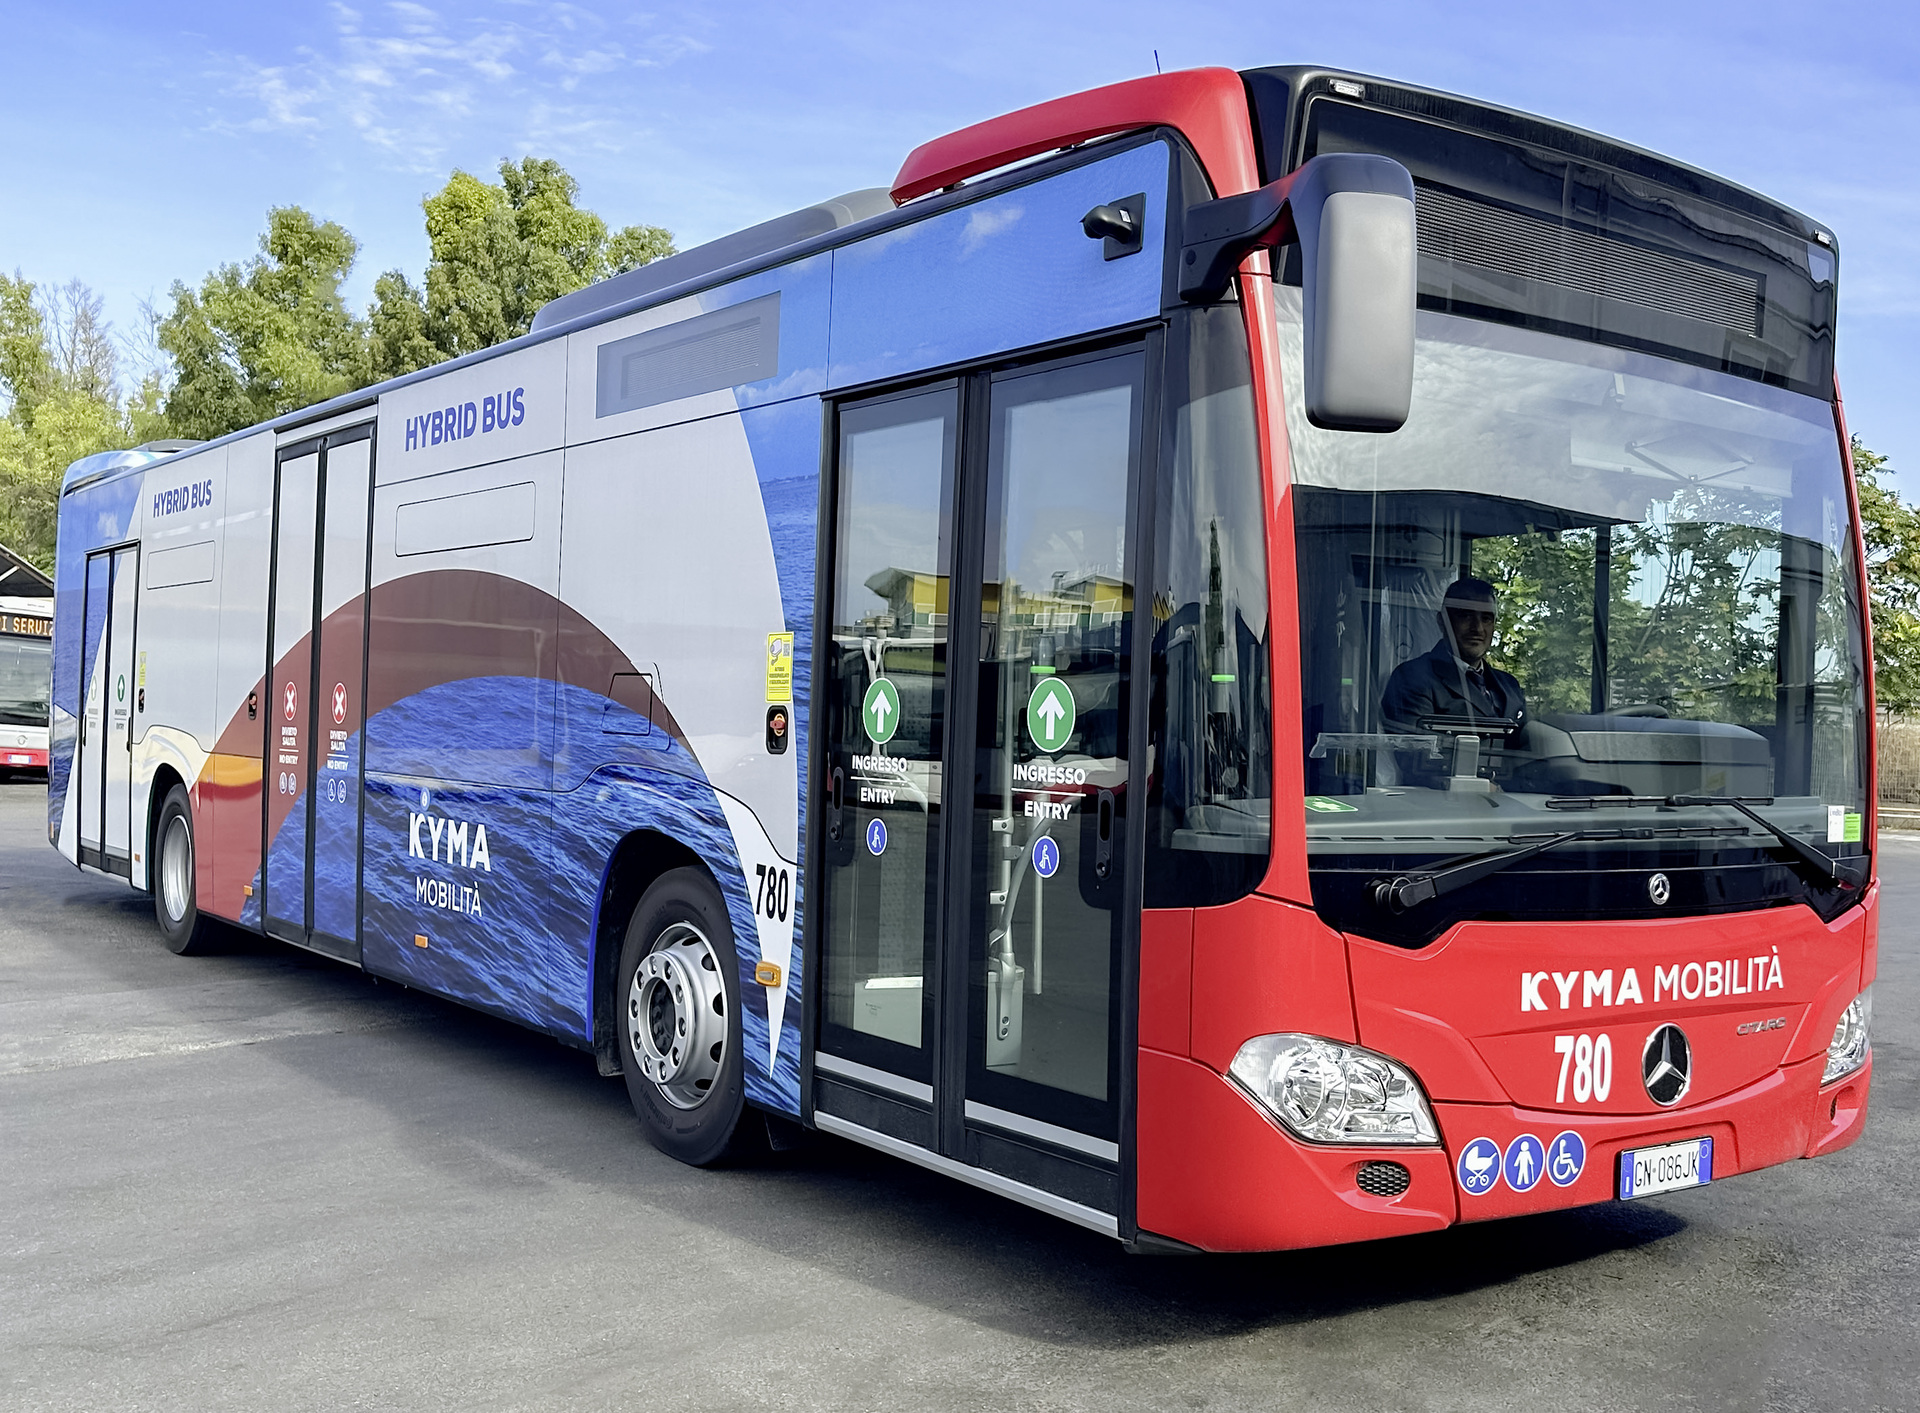 Electrified local public transport in Italy: 56 Mercedes-Benz Citaro hybrid buses for Kyma Mobilità in Taranto